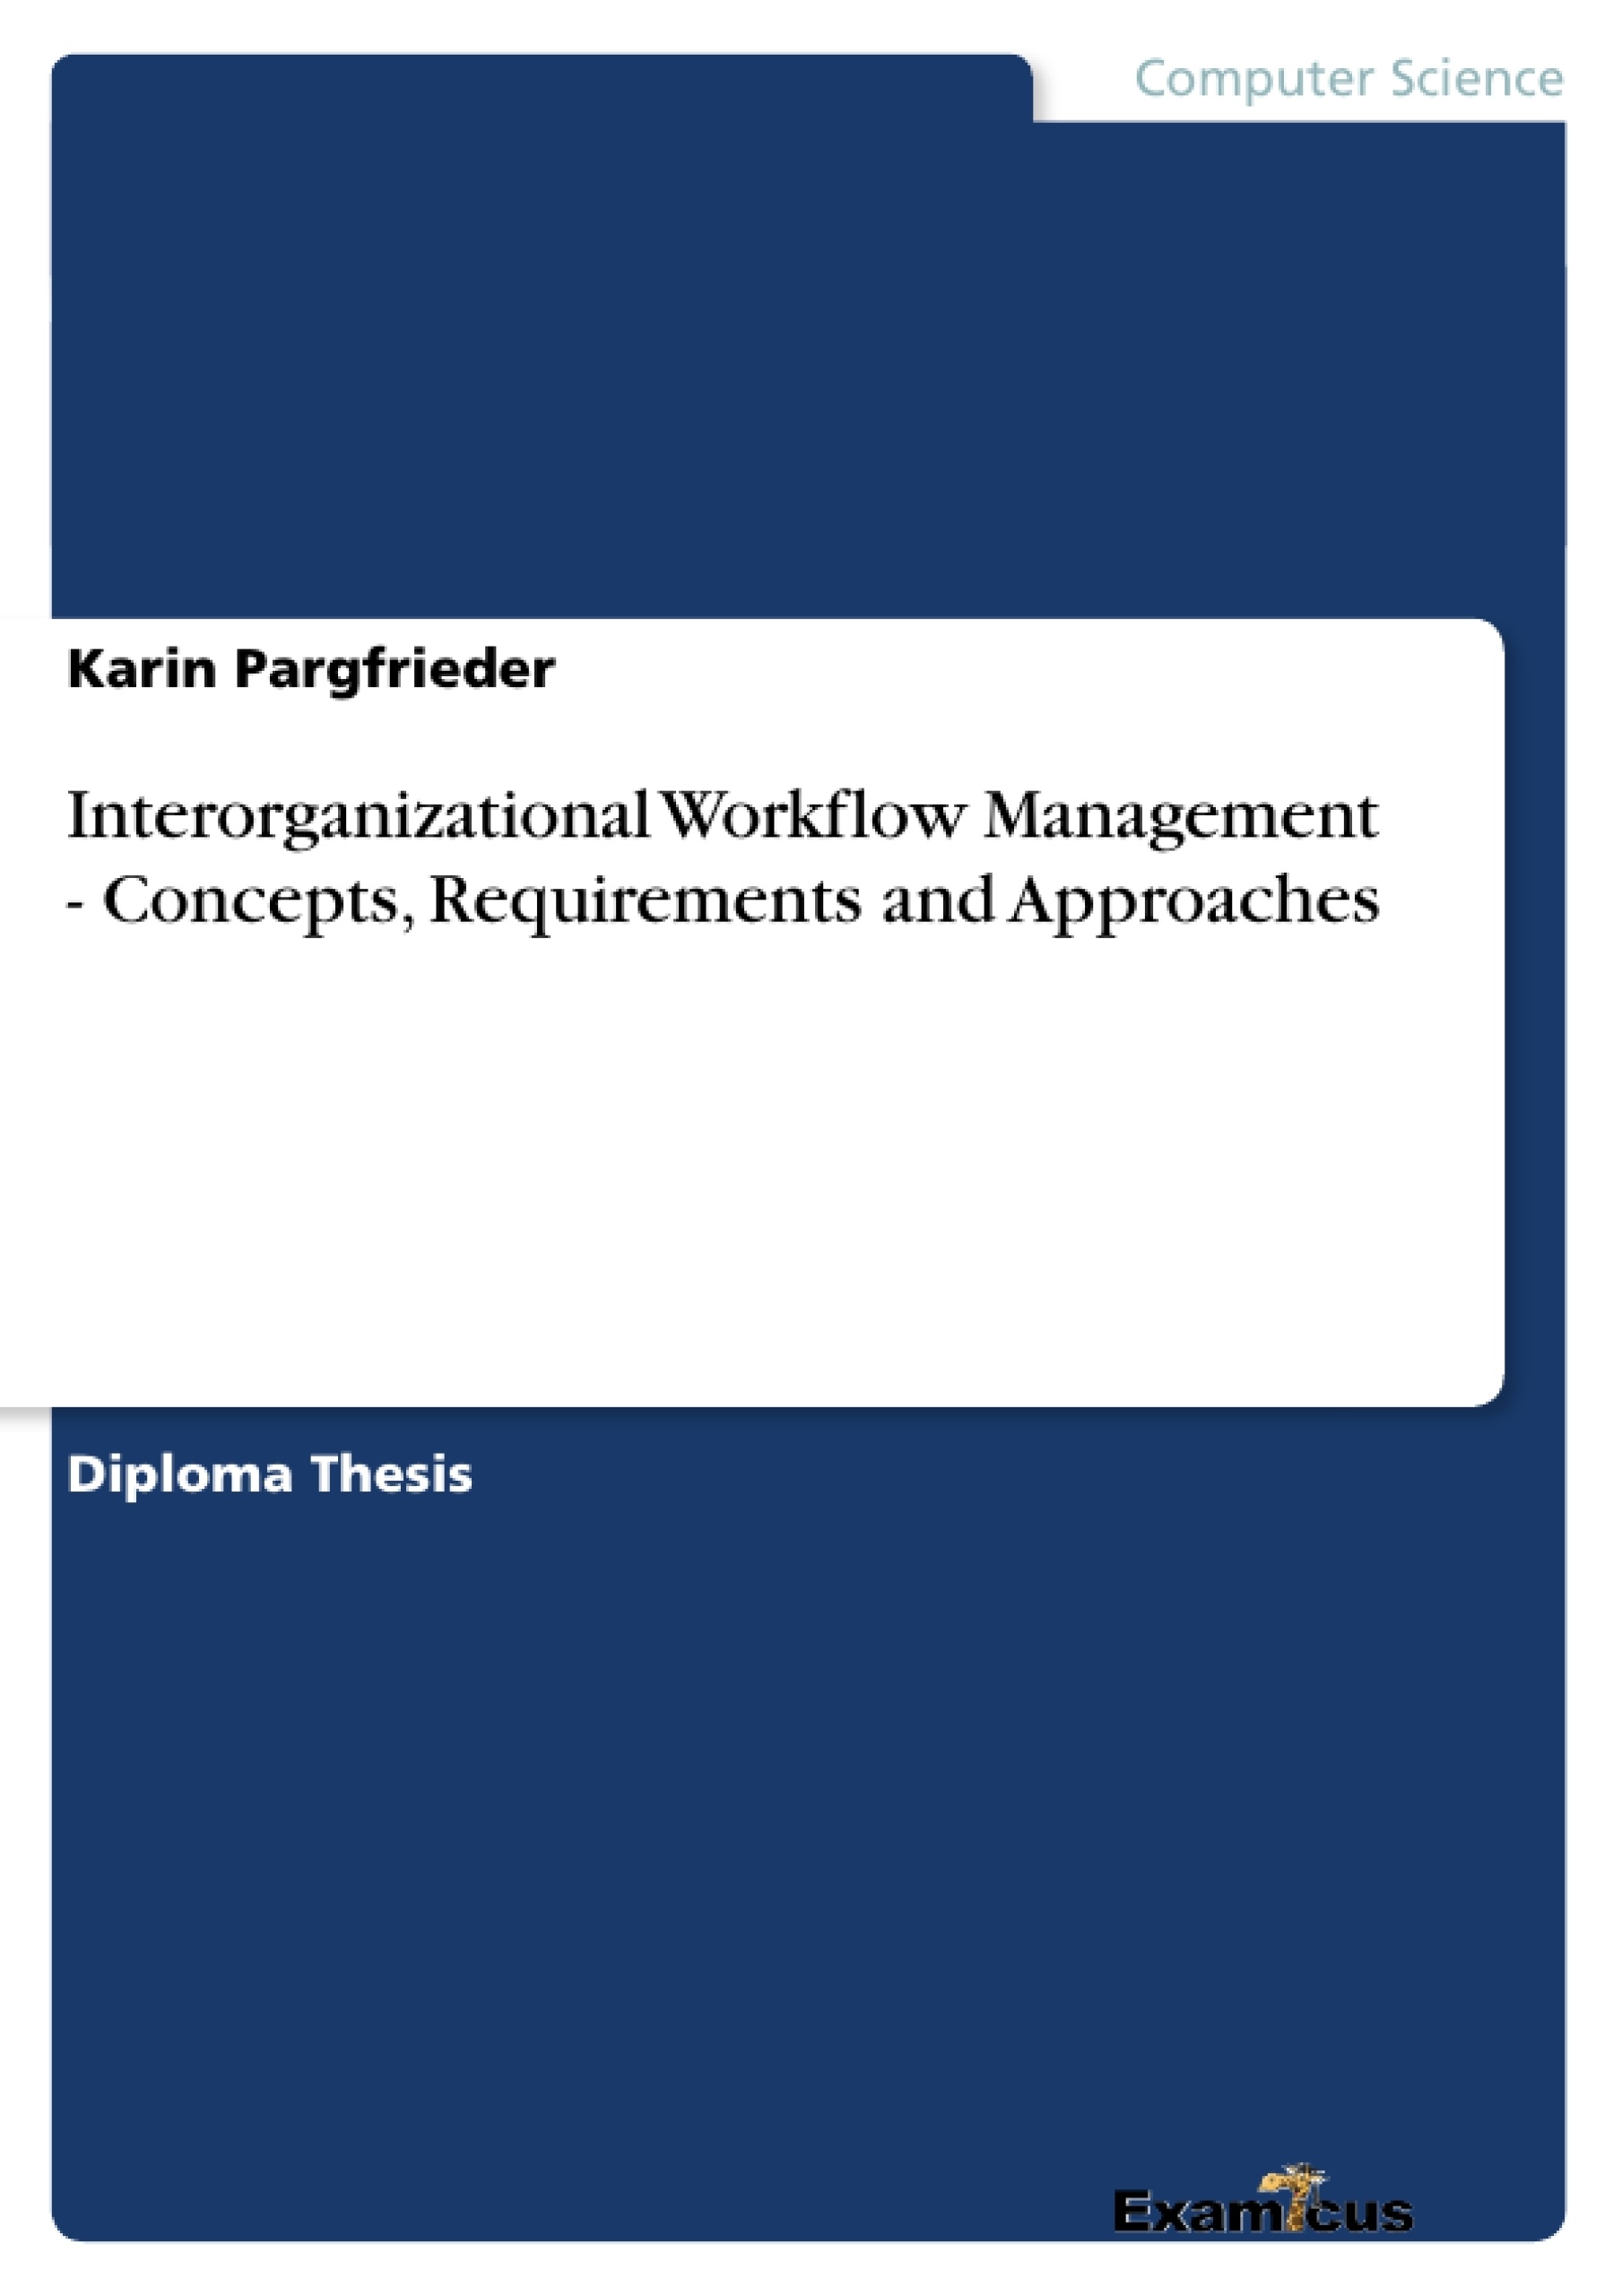 Title: Interorganizational Workflow Management - Concepts, Requirements and Approaches